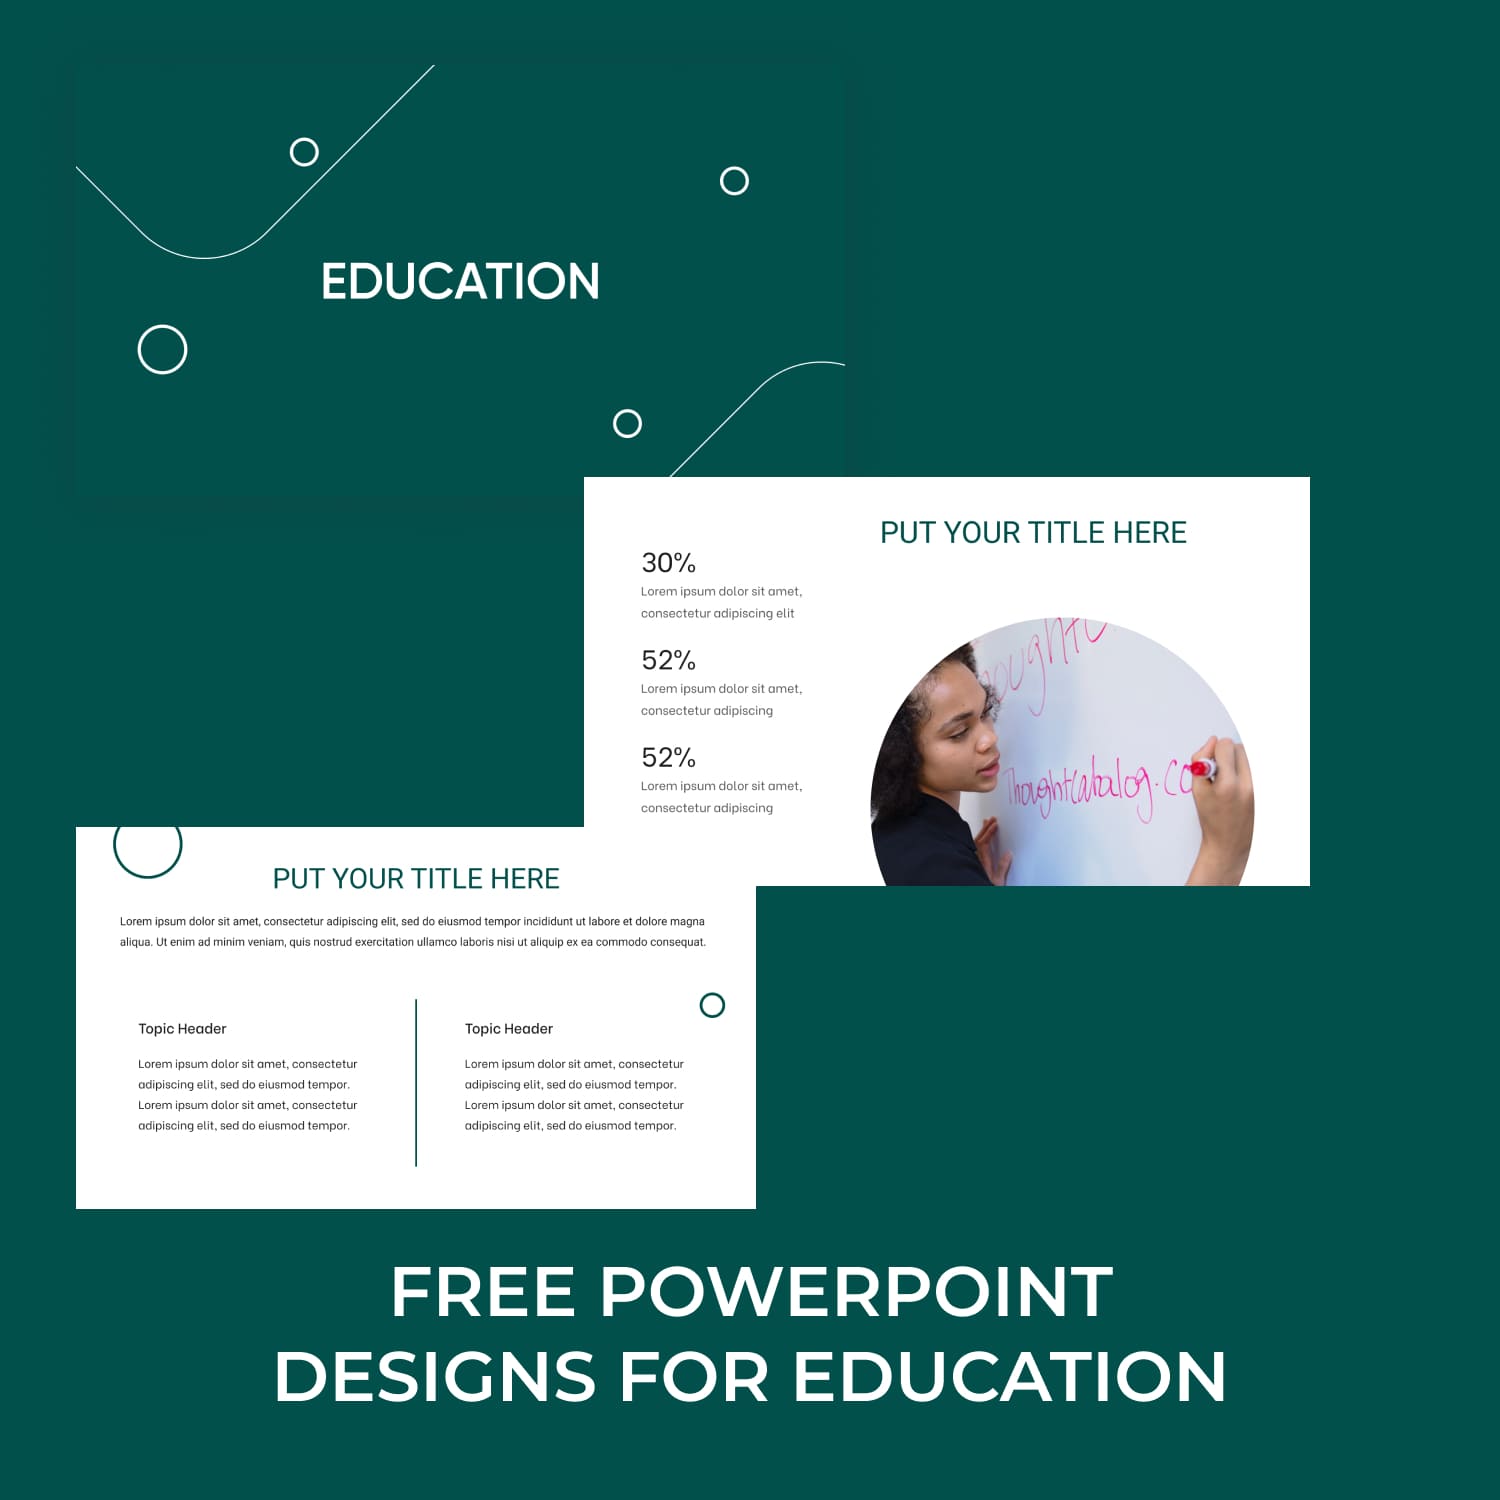 Free Powerpoint Designs For Education 1500 1500 1.